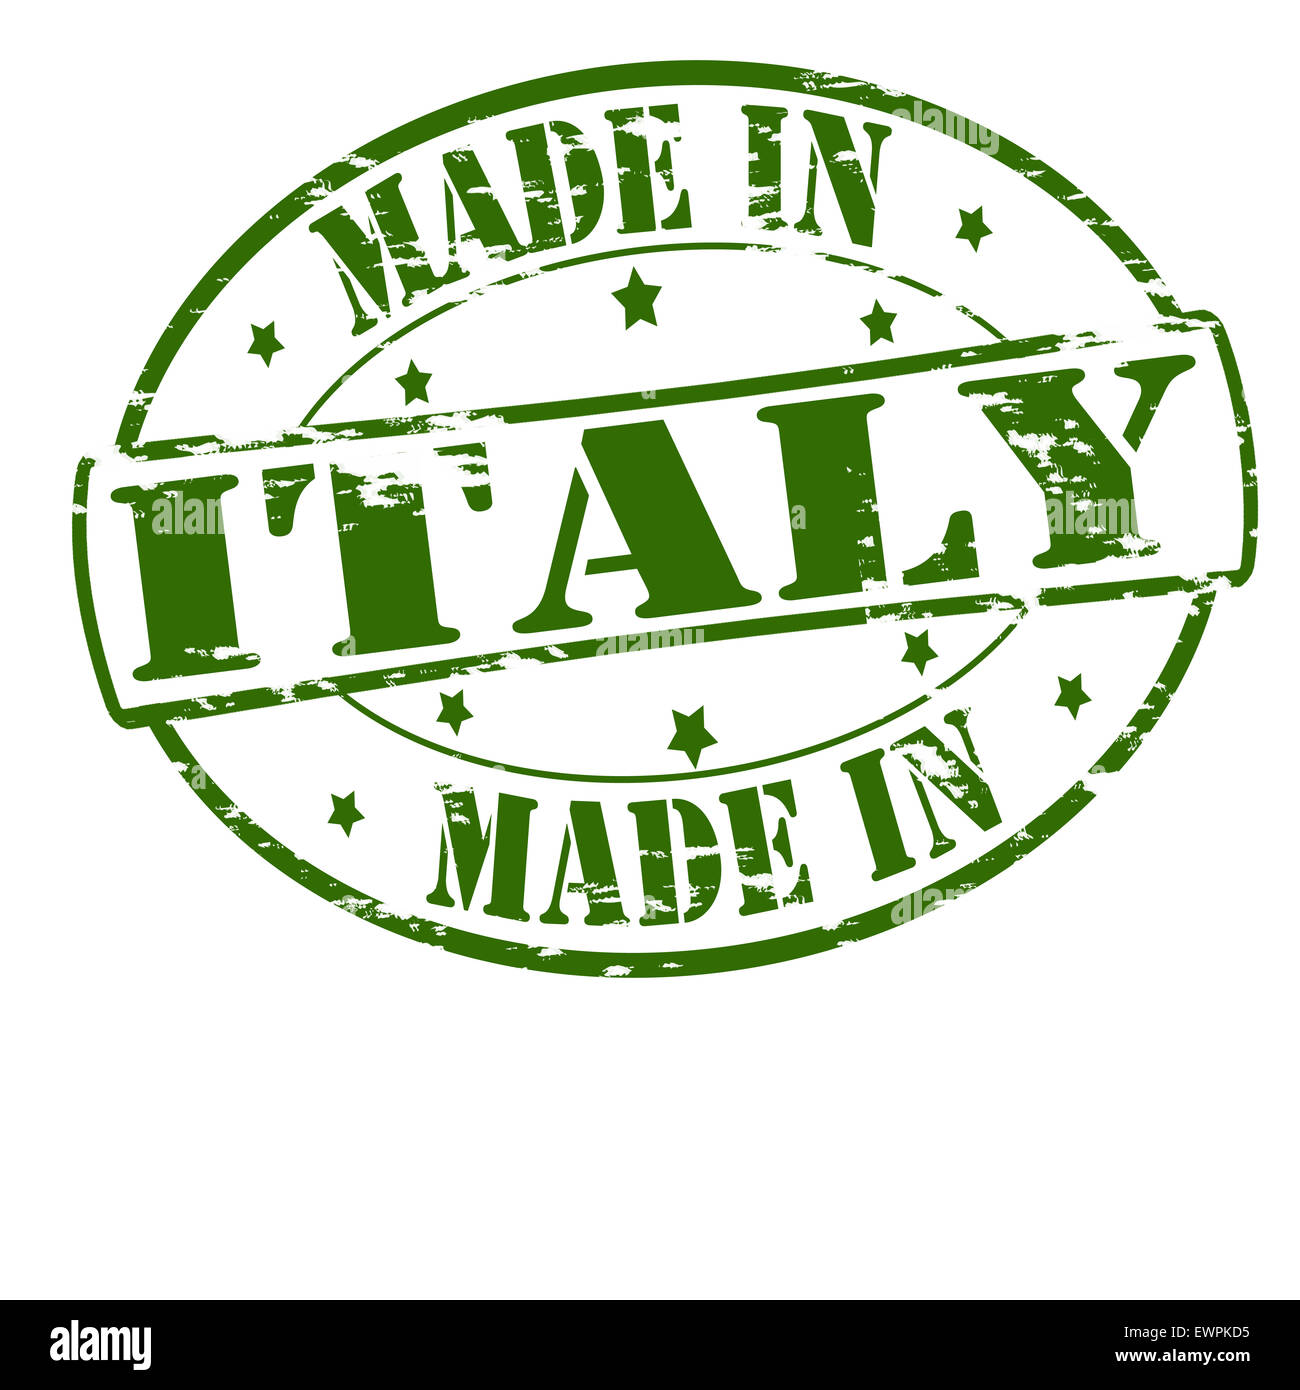 Rubber stamp with text made in Italy inside, illustration Stock Photo